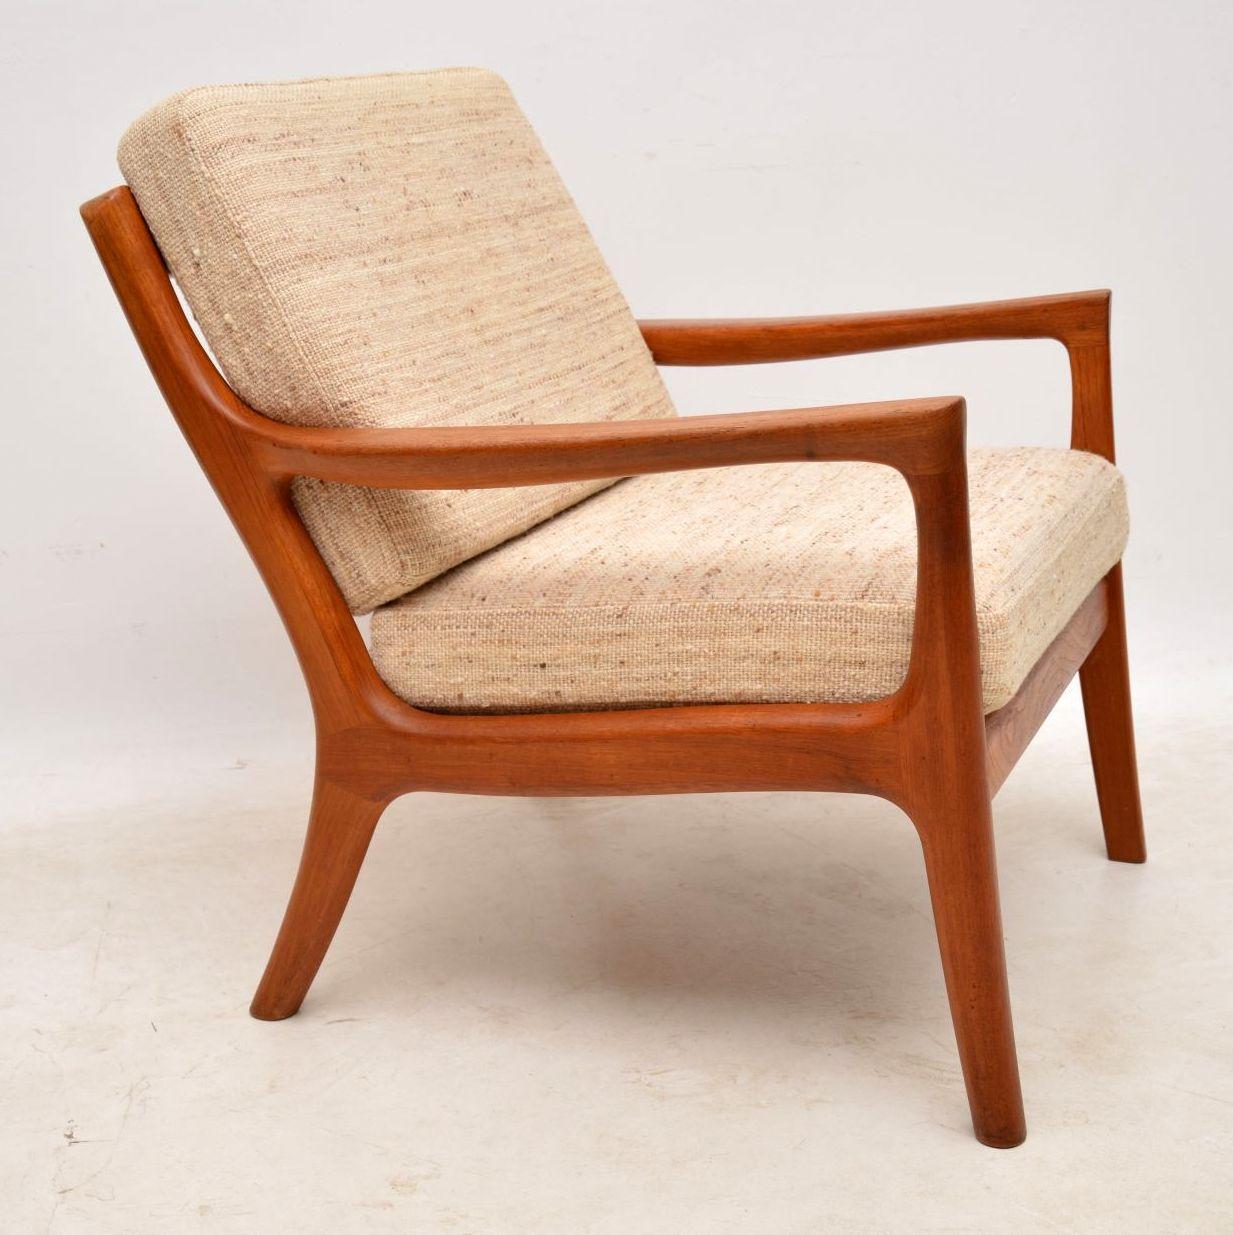 A very stylish and extremely well made Danish vintage armchair in solid teak, this dates from the 1960s. It’s in great condition for its age, the frame just has some very light surface wear here and there. It’s sturdy, sound and very comfortable,